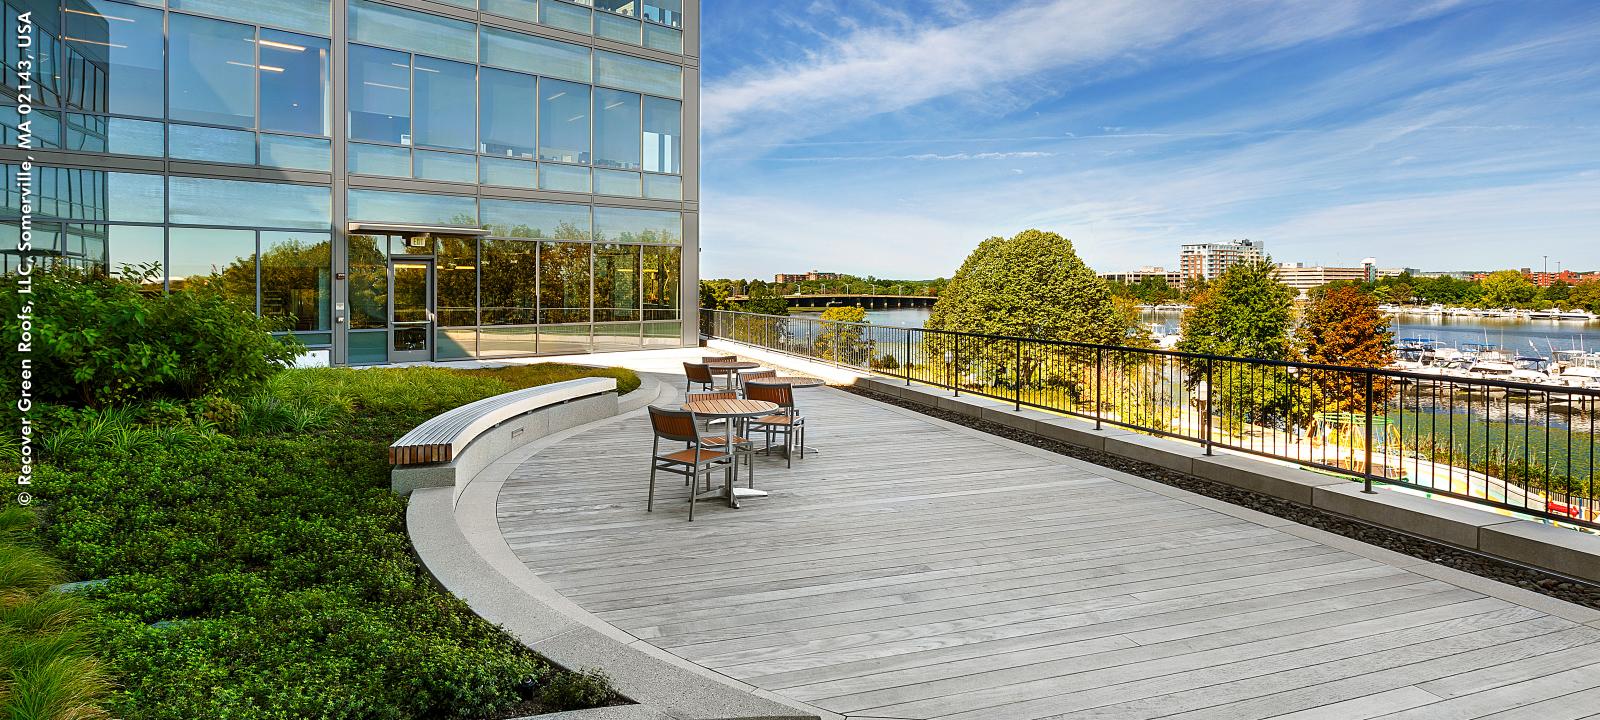 Office Building, Somerville, MA | ZinCo Green Roof Systems USA